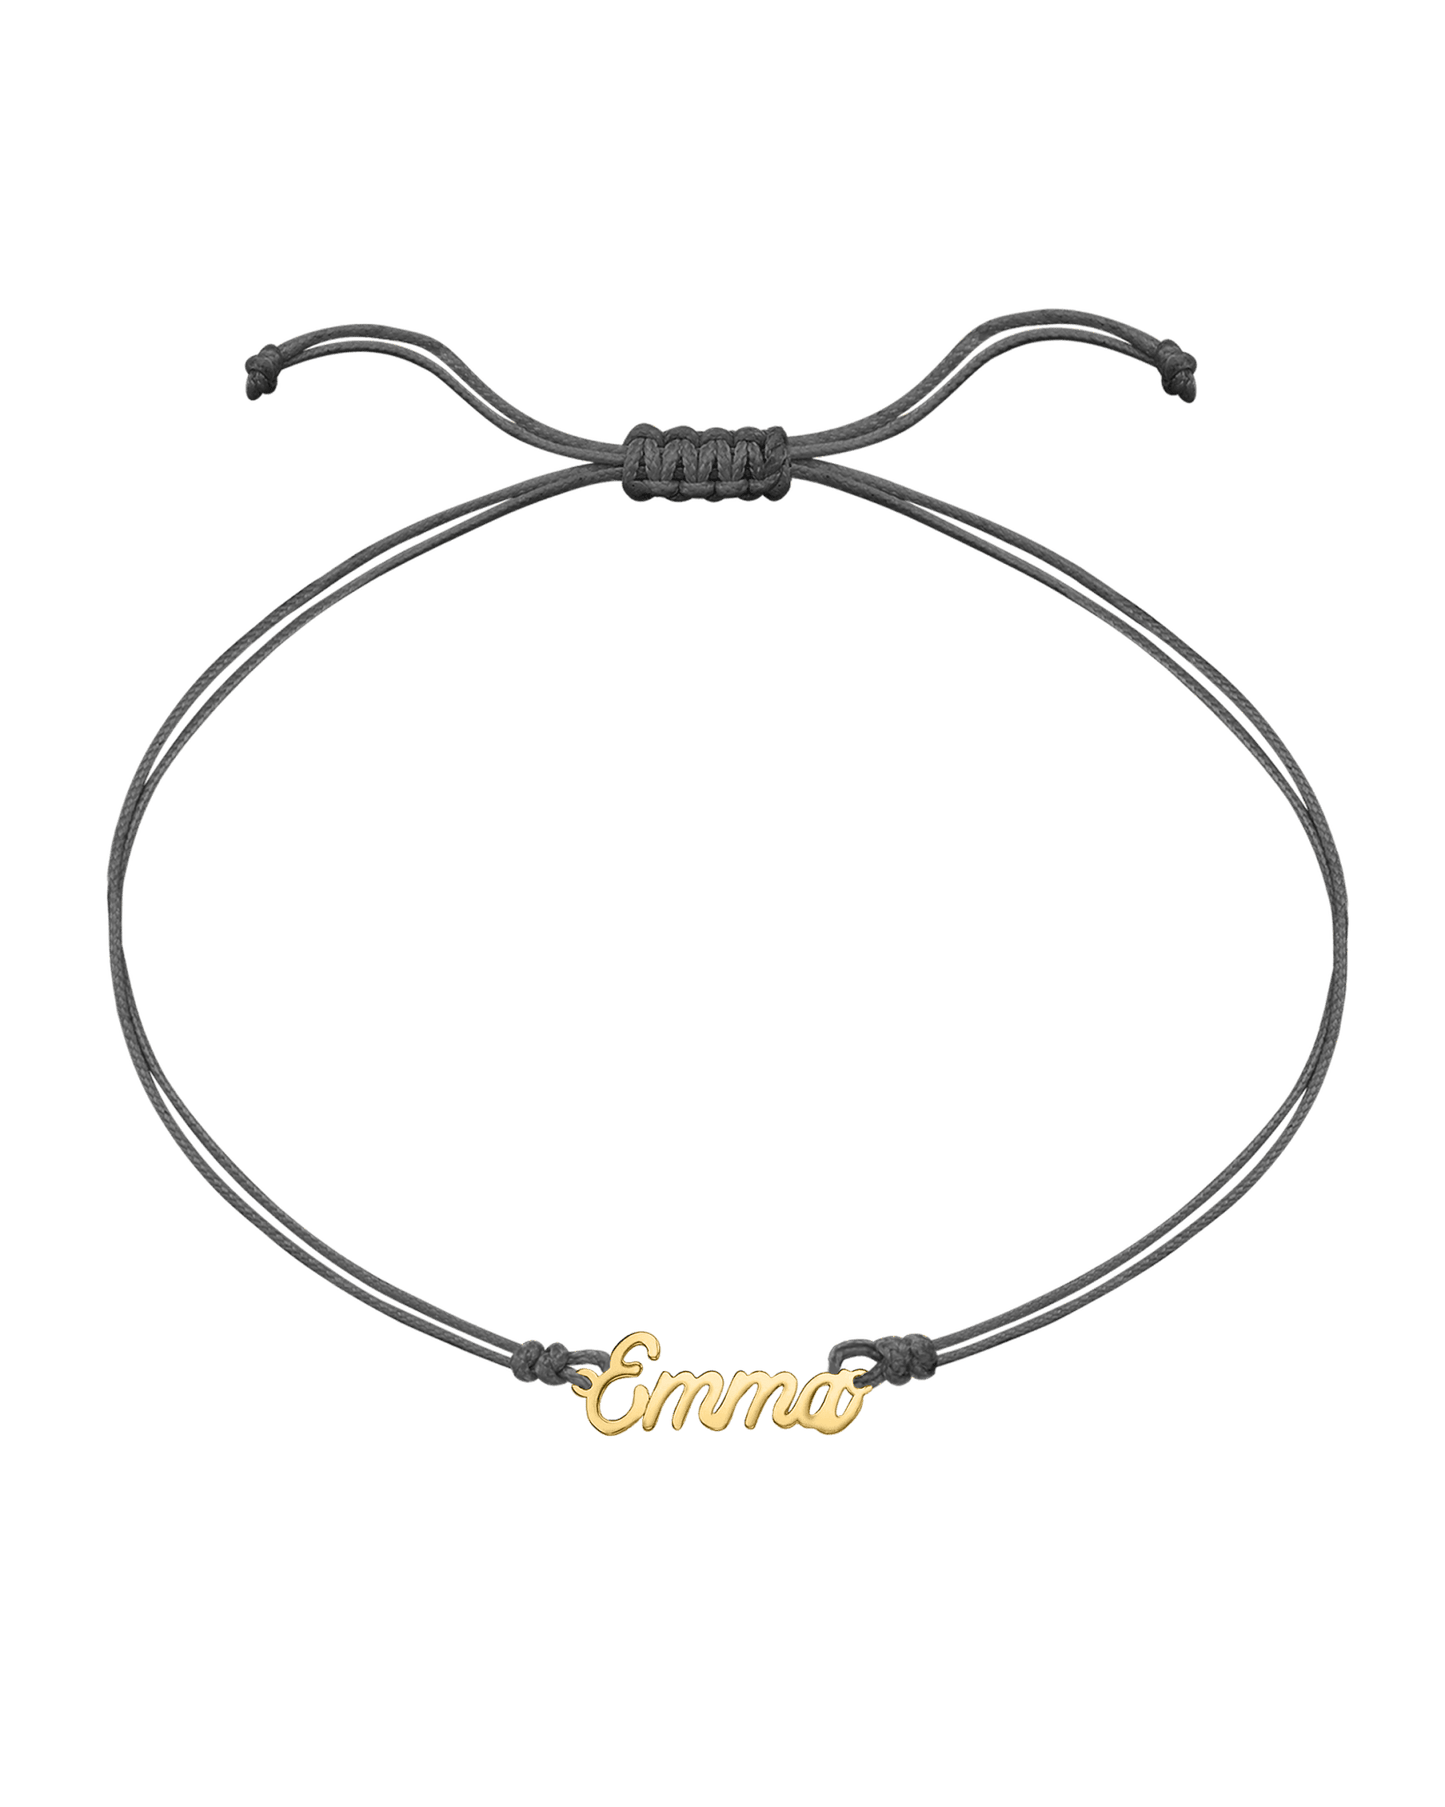 Name Plate String of Love - 14K Yellow Gold Bracelets 14K Solid Gold Grey 1 